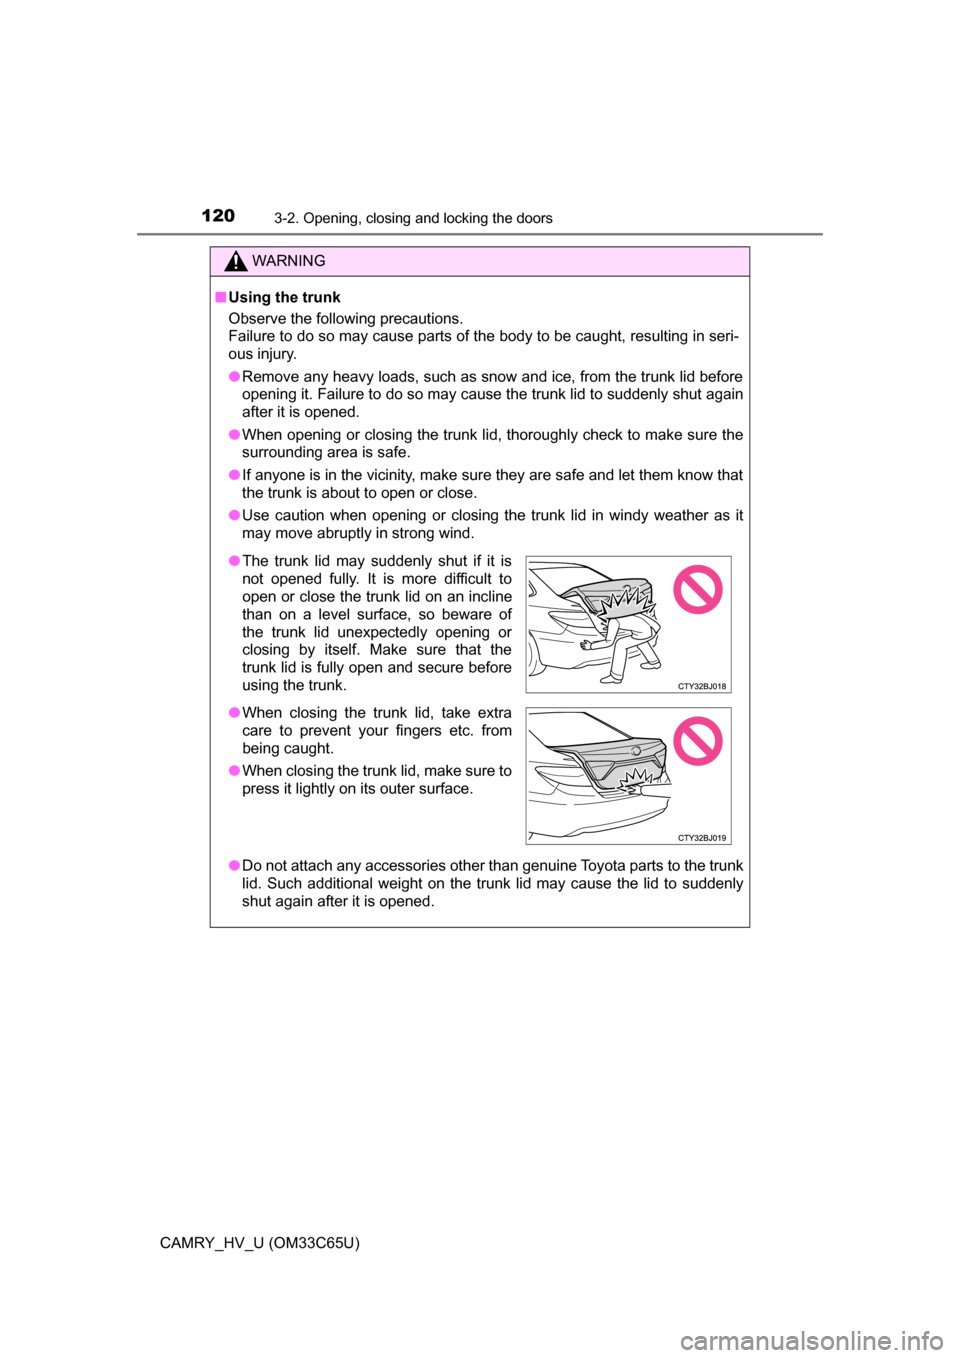 TOYOTA CAMRY HYBRID 2017 XV50 / 9.G Owners Manual 1203-2. Opening, closing and locking the doors
CAMRY_HV_U (OM33C65U)
WARNING
■Using the trunk
Observe the following precautions.
Failure to do so may cause parts of the body to be caught, resulting 